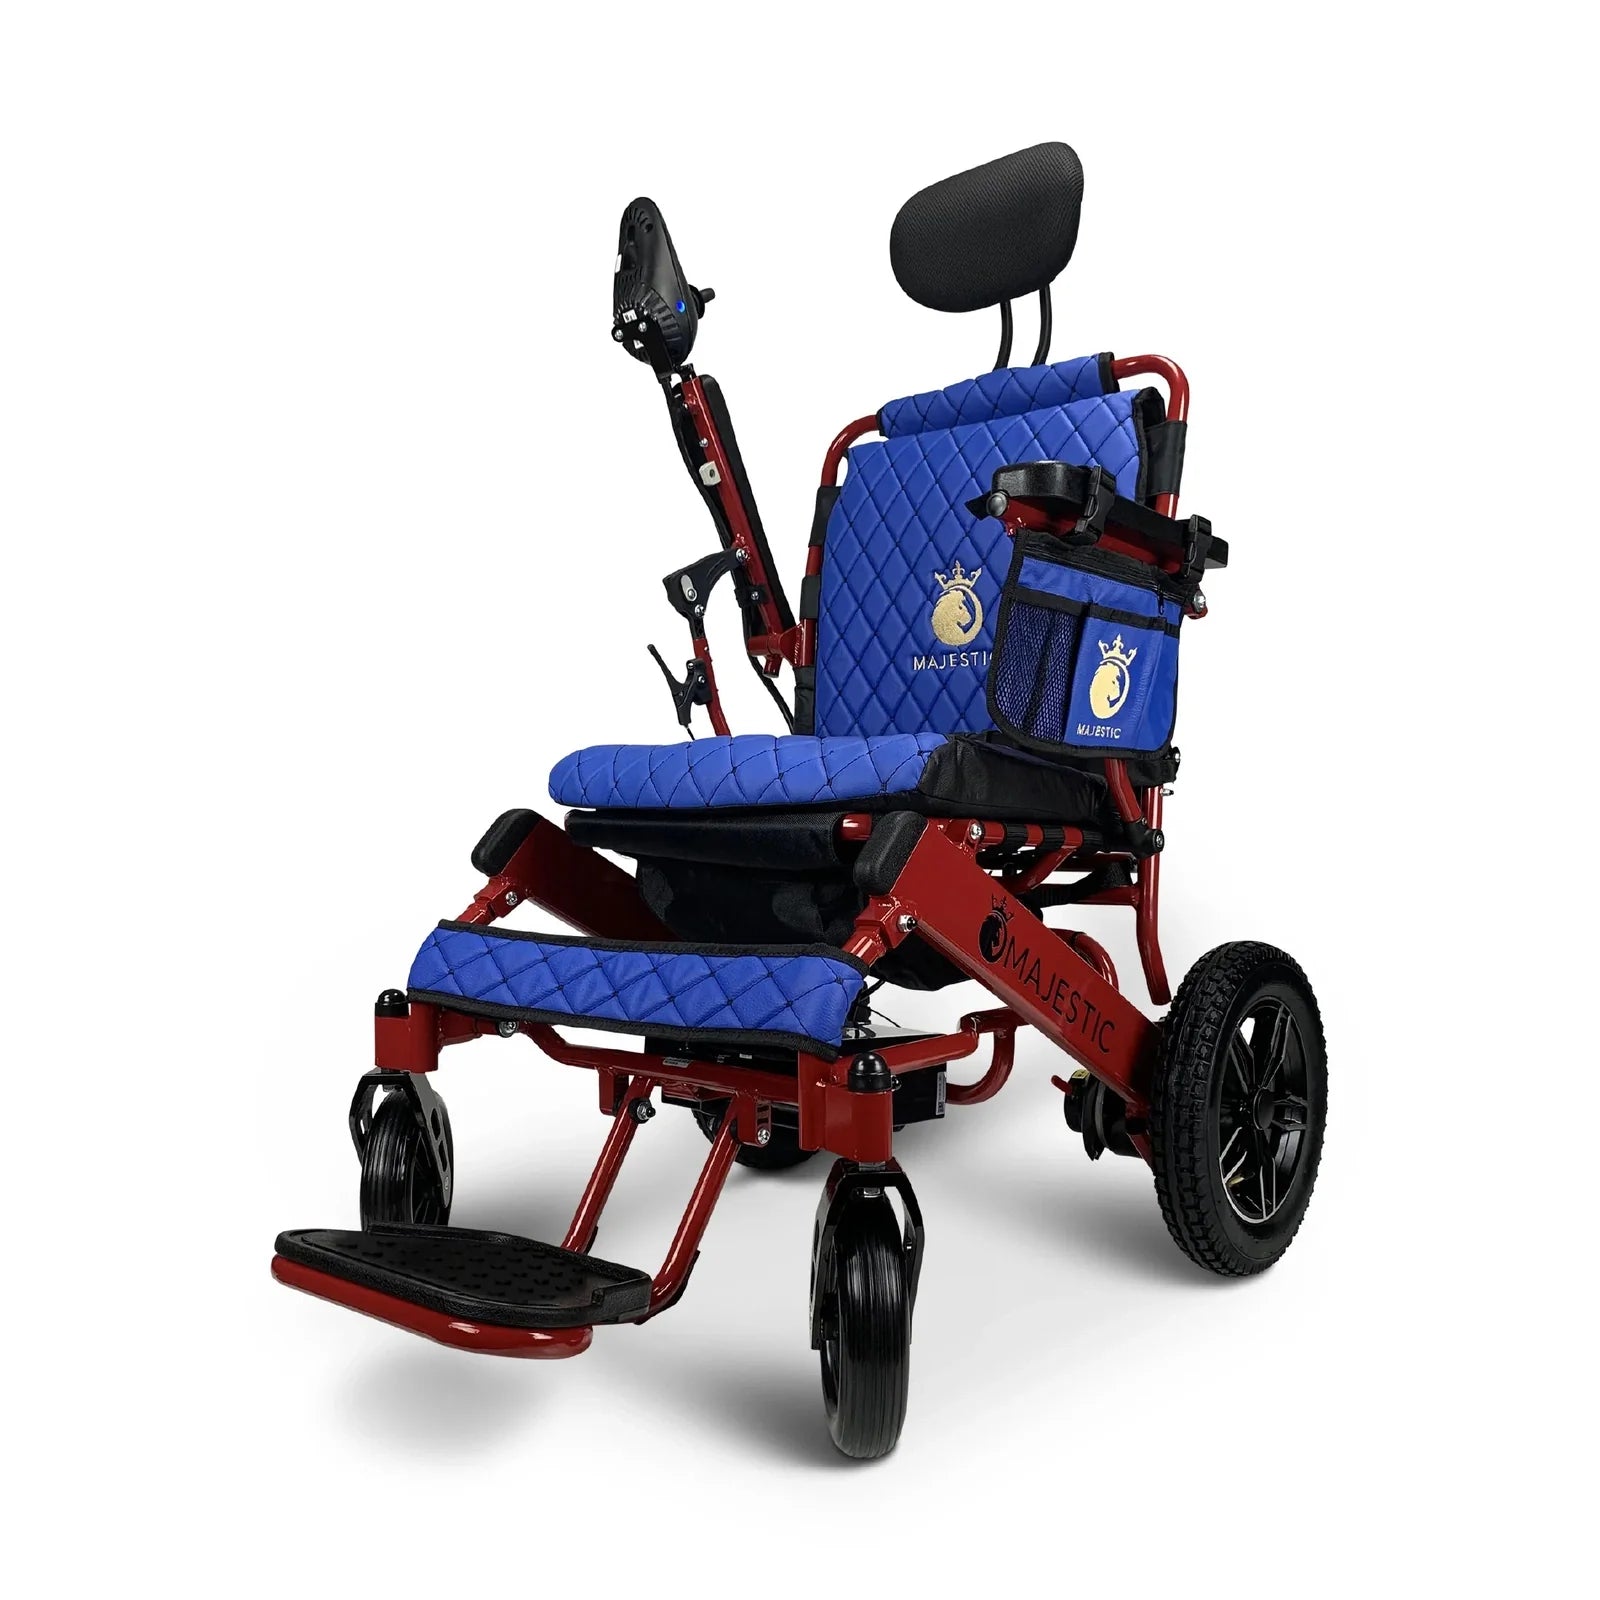 ComfyGO Majestic IQ-8000 Remote Controlled Lightweight Folding Electric Wheelchair Power Wheelchairs ComfyGO Red Blue 10 Miles & 17.5" Seat Width